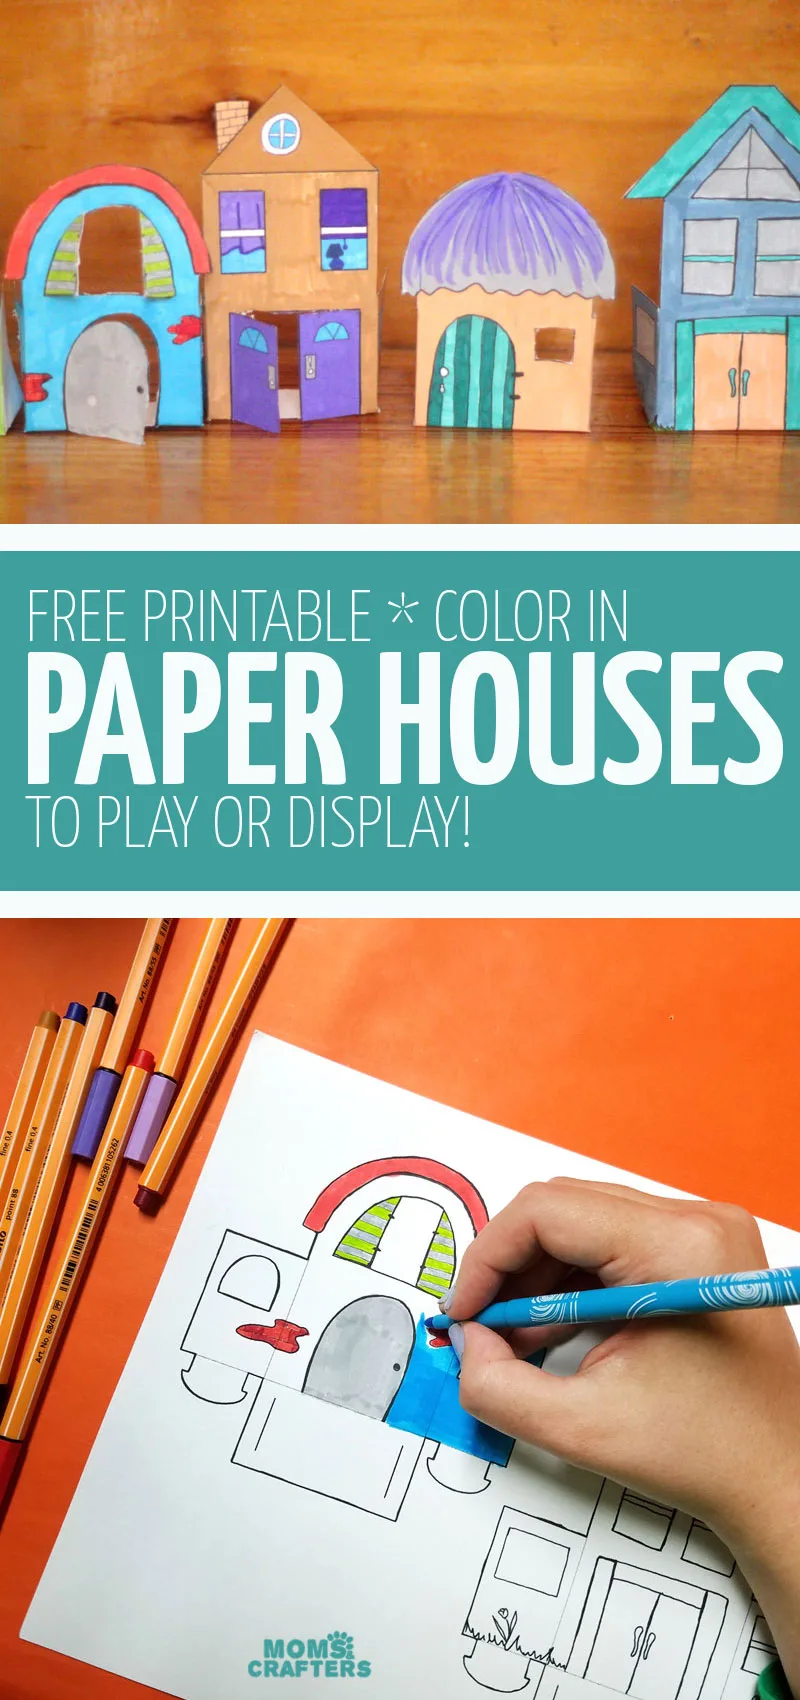 Craft these paper houses - fun free printable coloring pages and paper crafts for kids, teens, tweens, and adults!